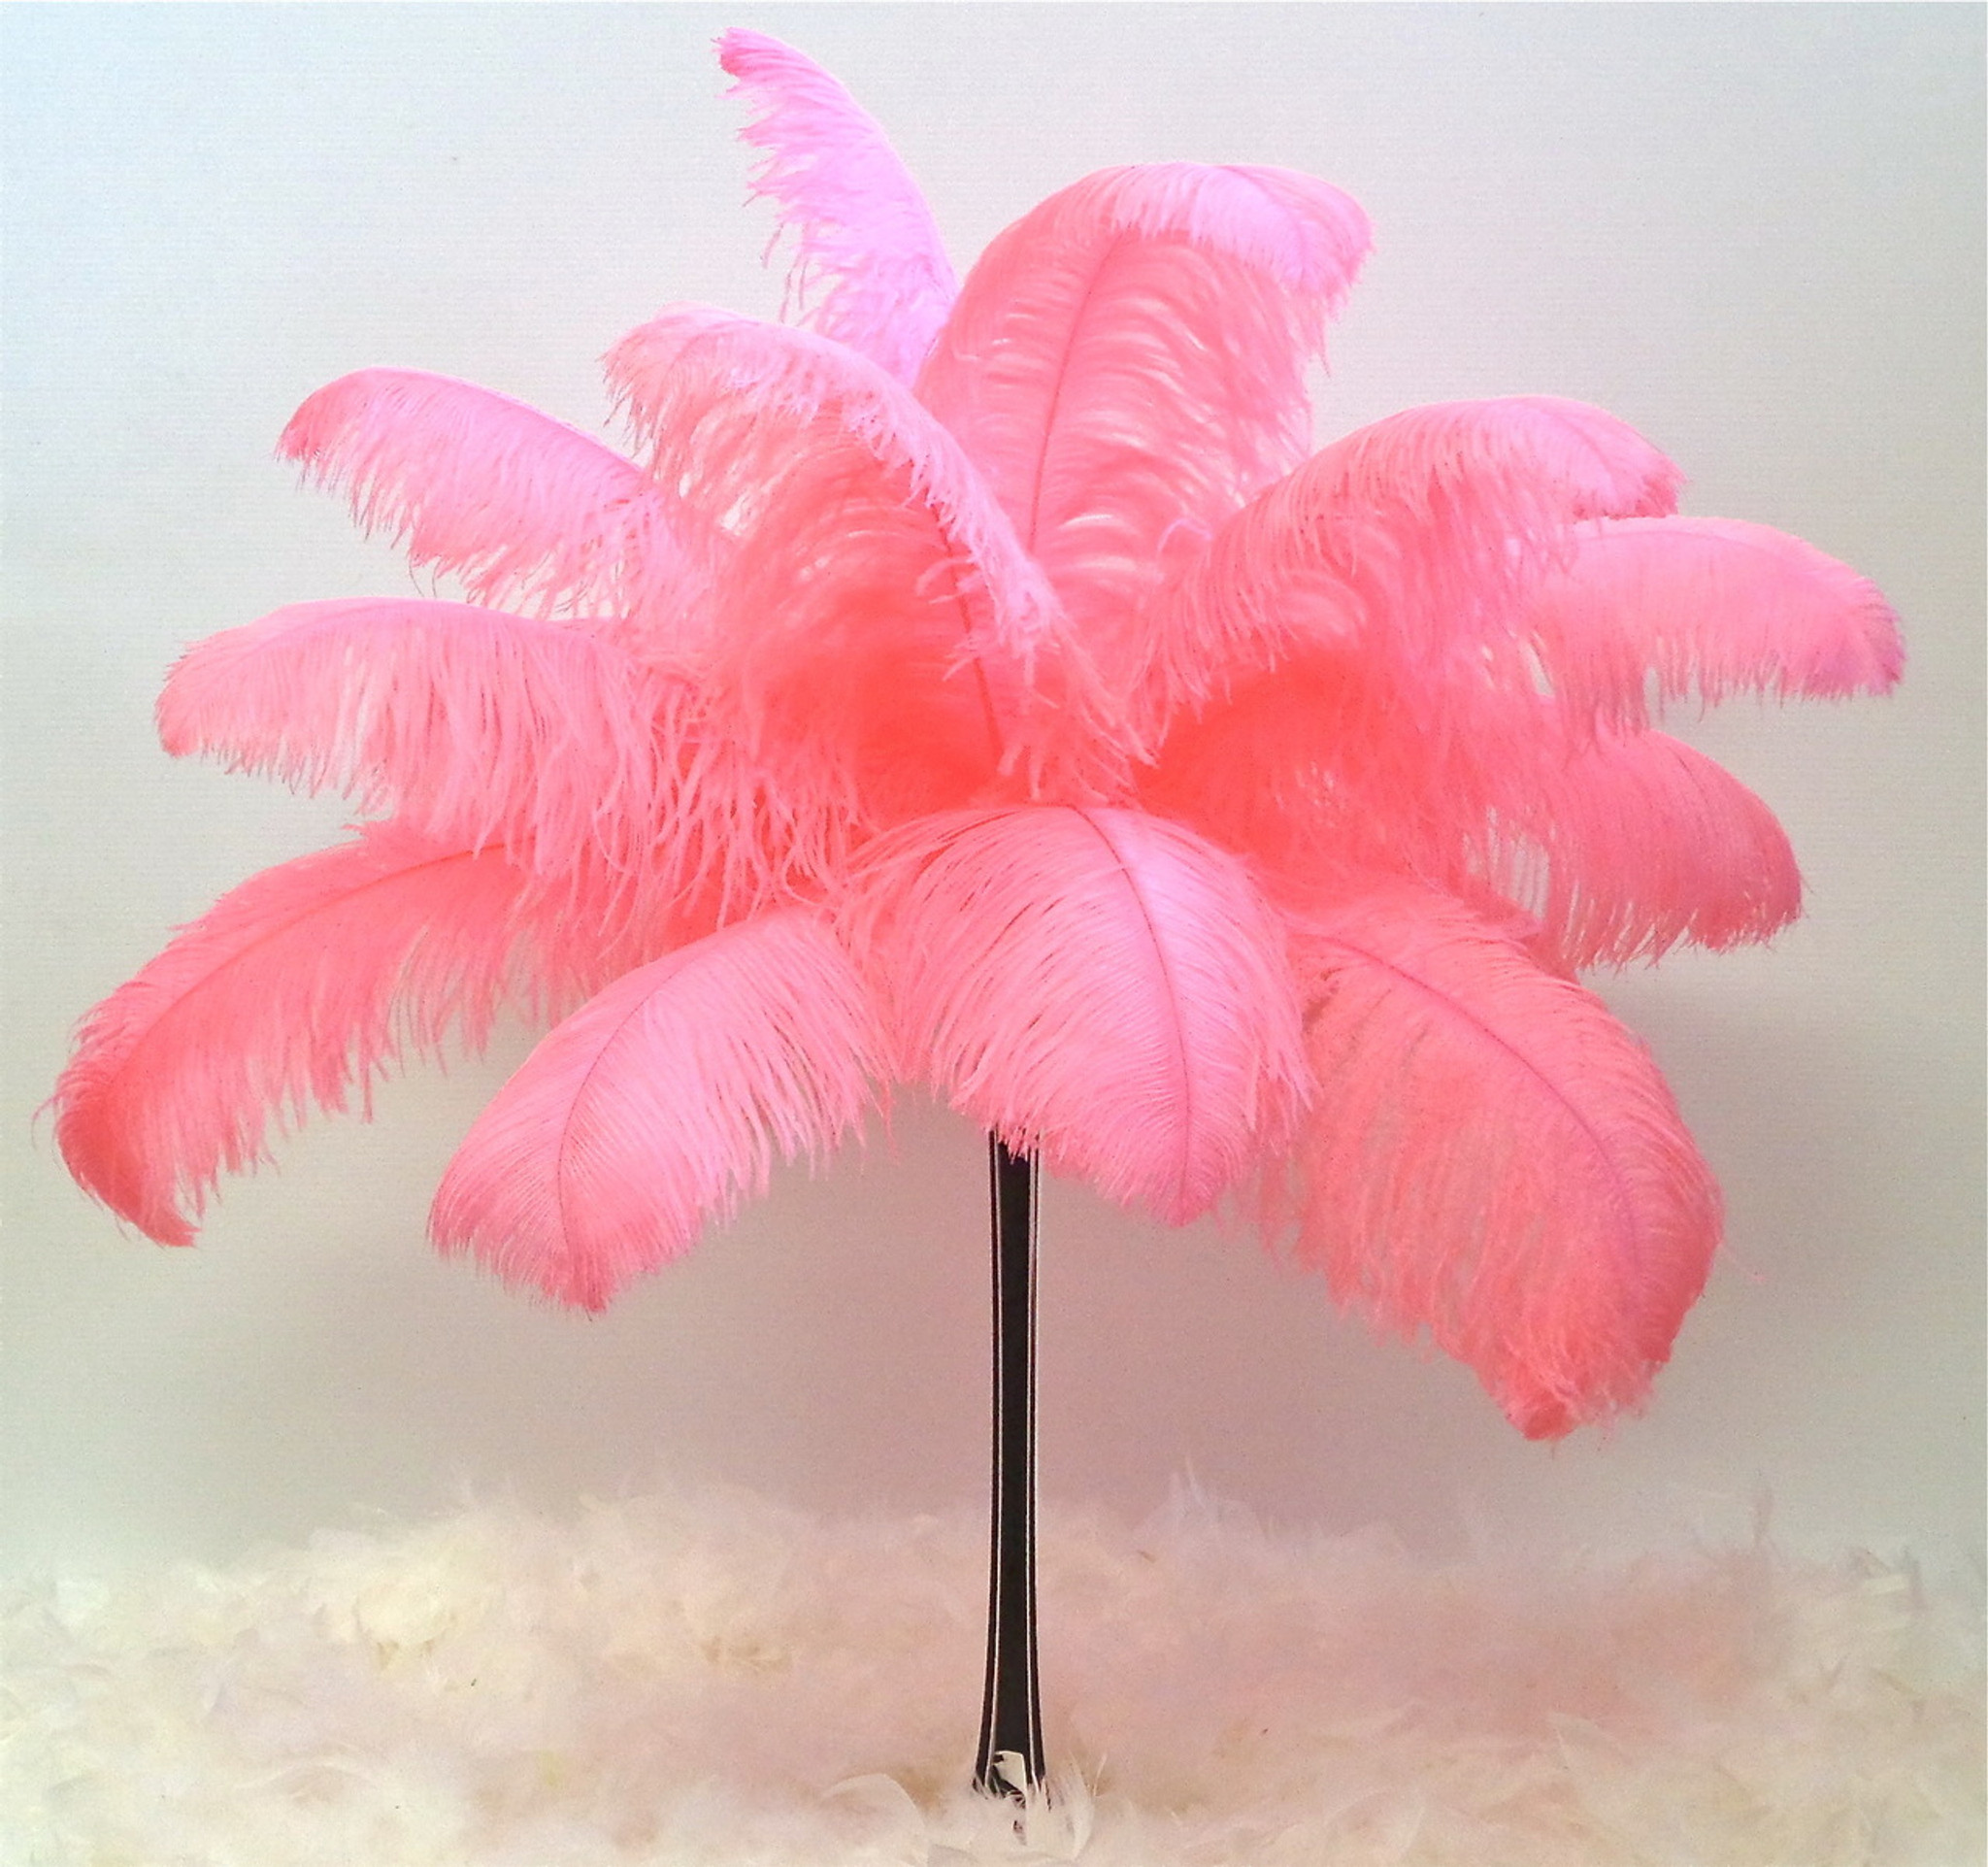 Hot Pink Ostrich Feathers 12-16 inch long per each